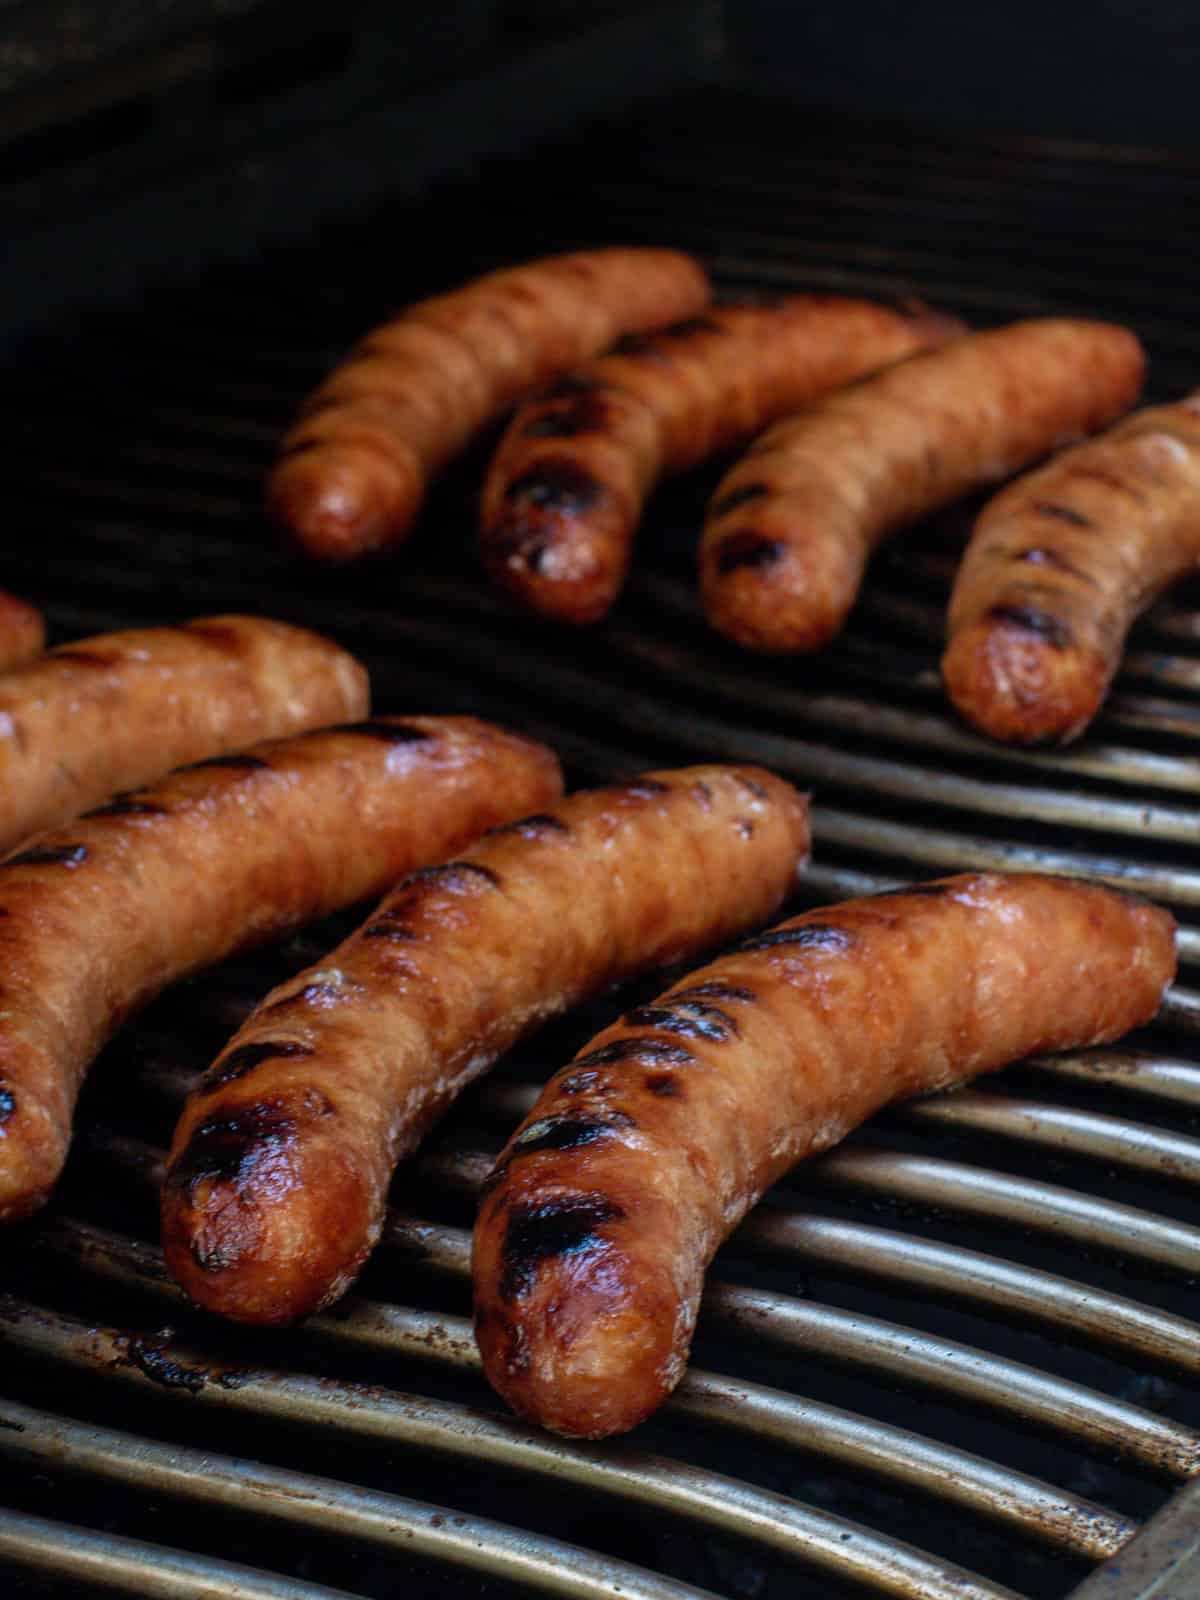 How to Grill Italian Sausages - The 